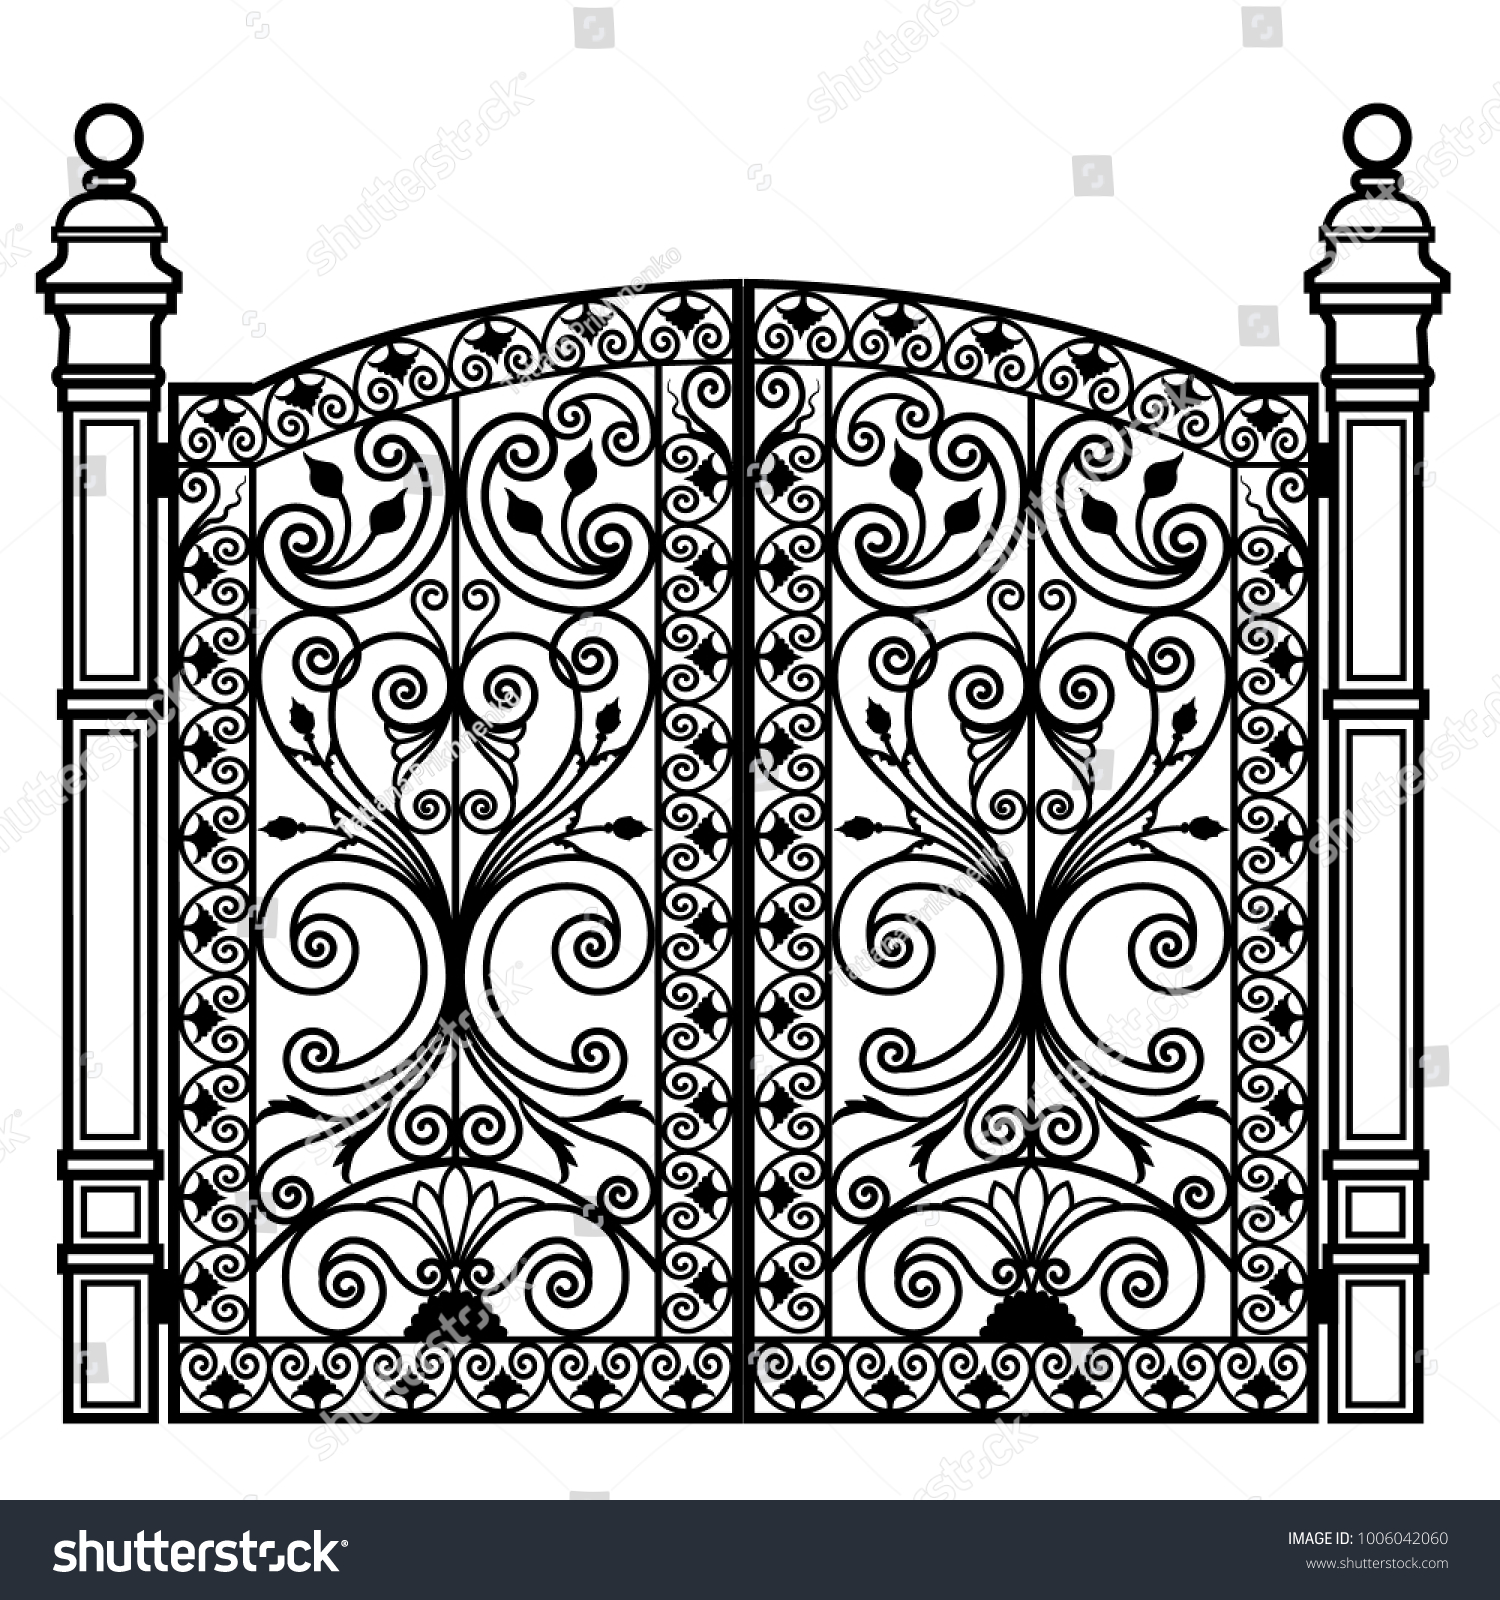 Black Metal Gate Forged Ornaments On Stock Vector 1006042060 ...